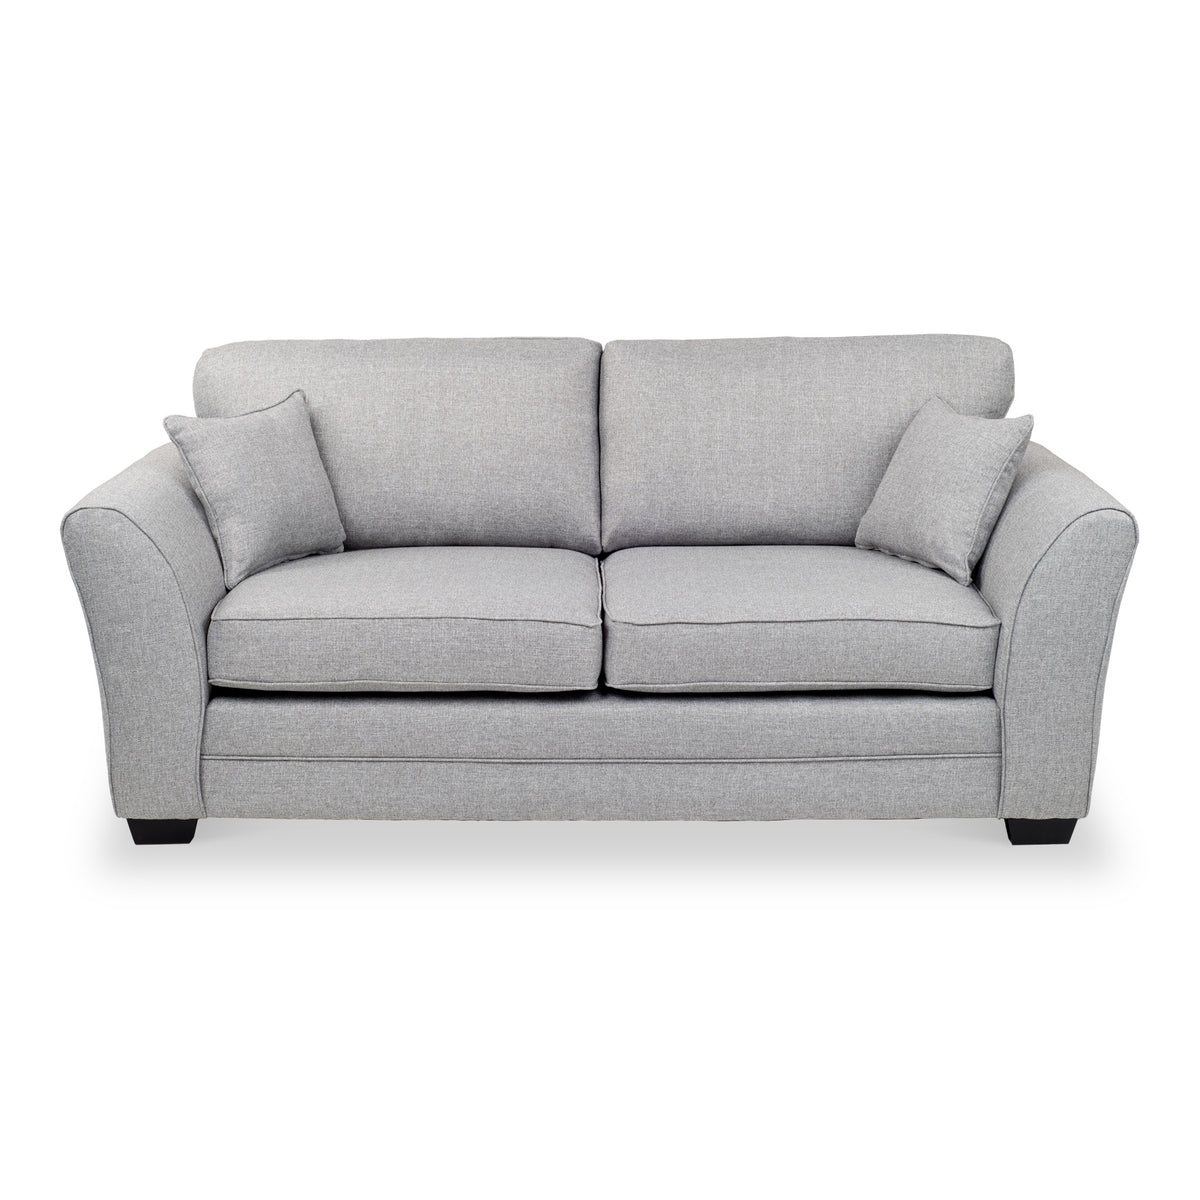 St Ives 3 Seater Sofa in Silver by Roseland Furniture